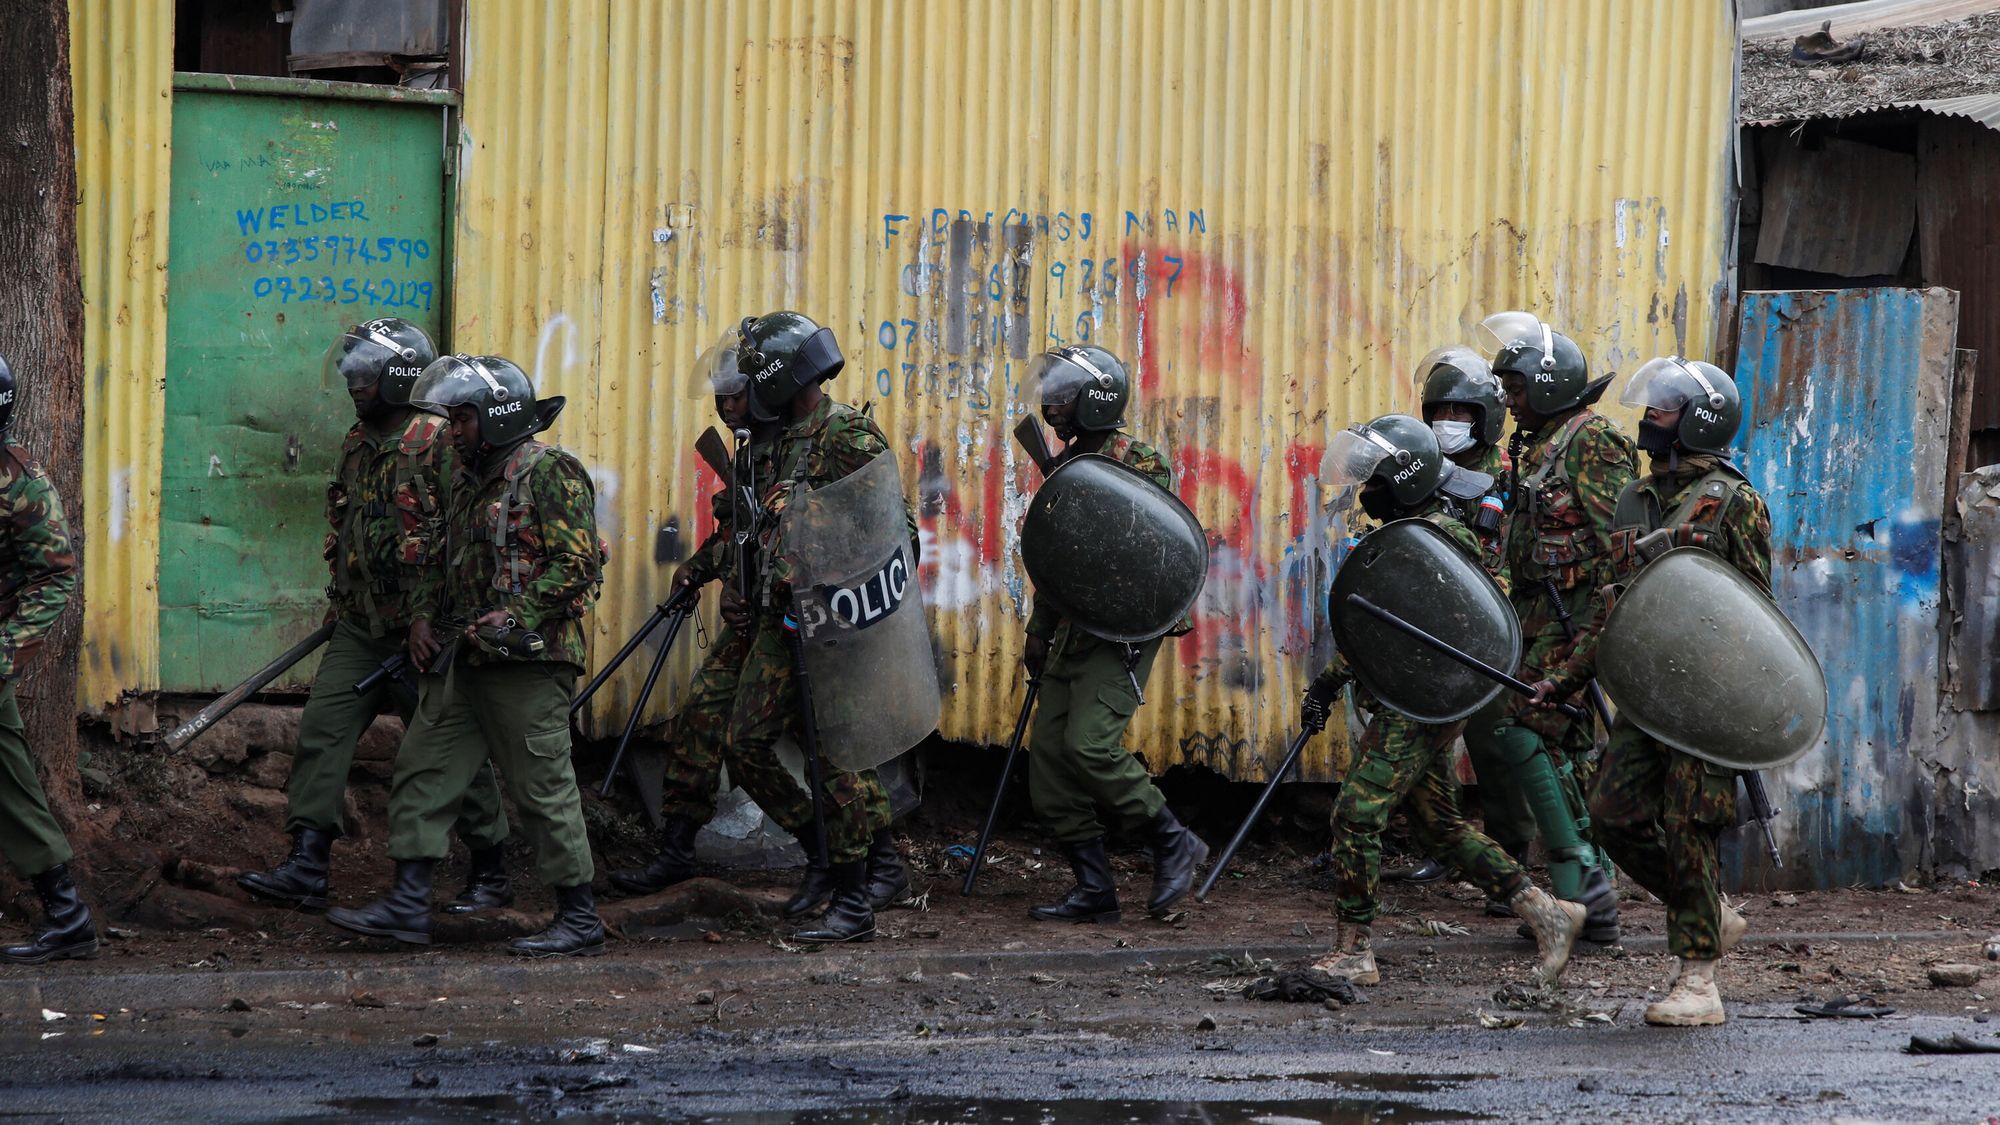 Kenya Police Ignore Criticism, Continues Fight in Haiti